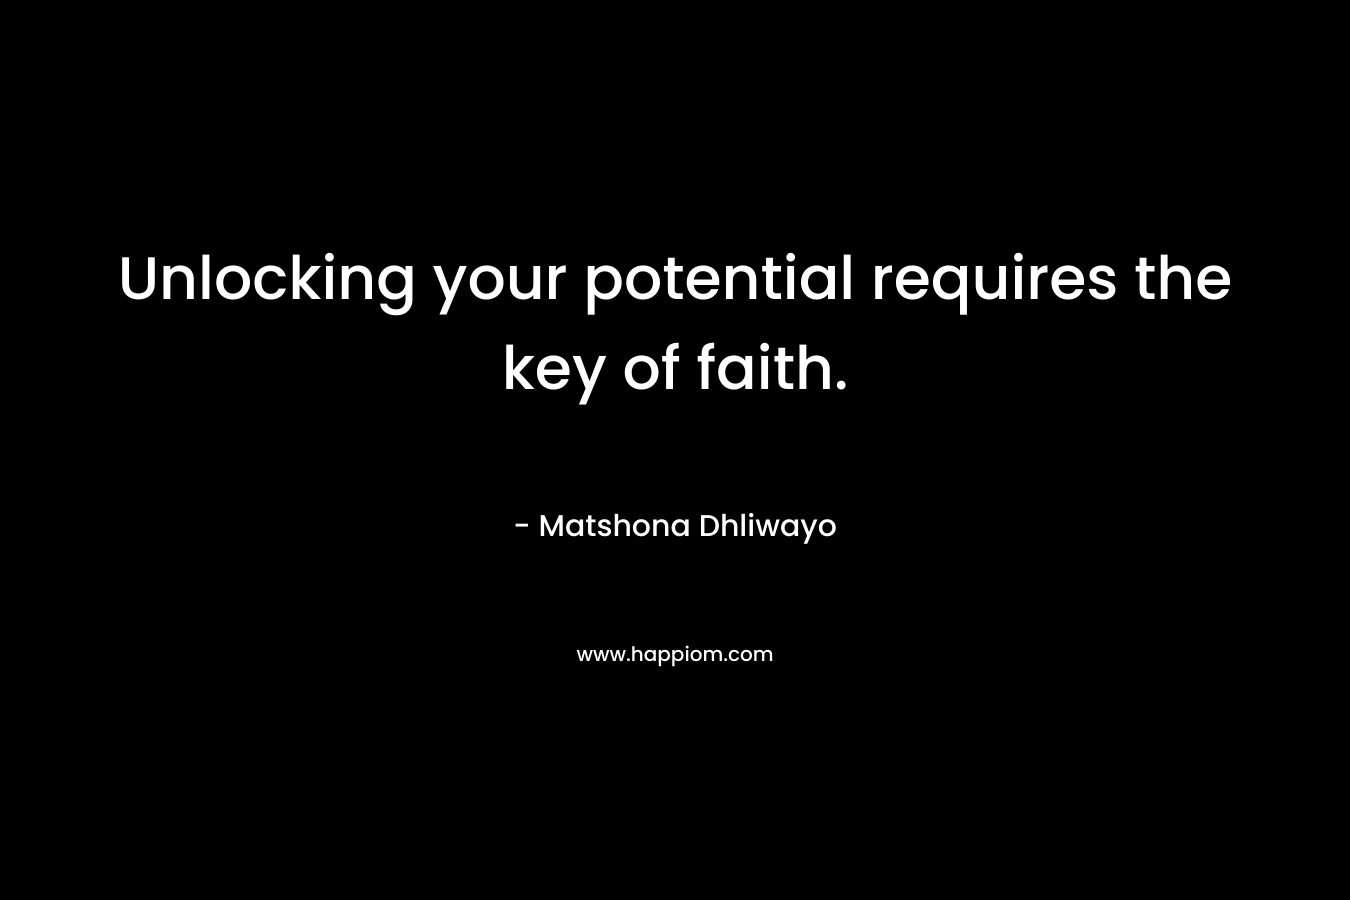 Unlocking your potential requires the key of faith.